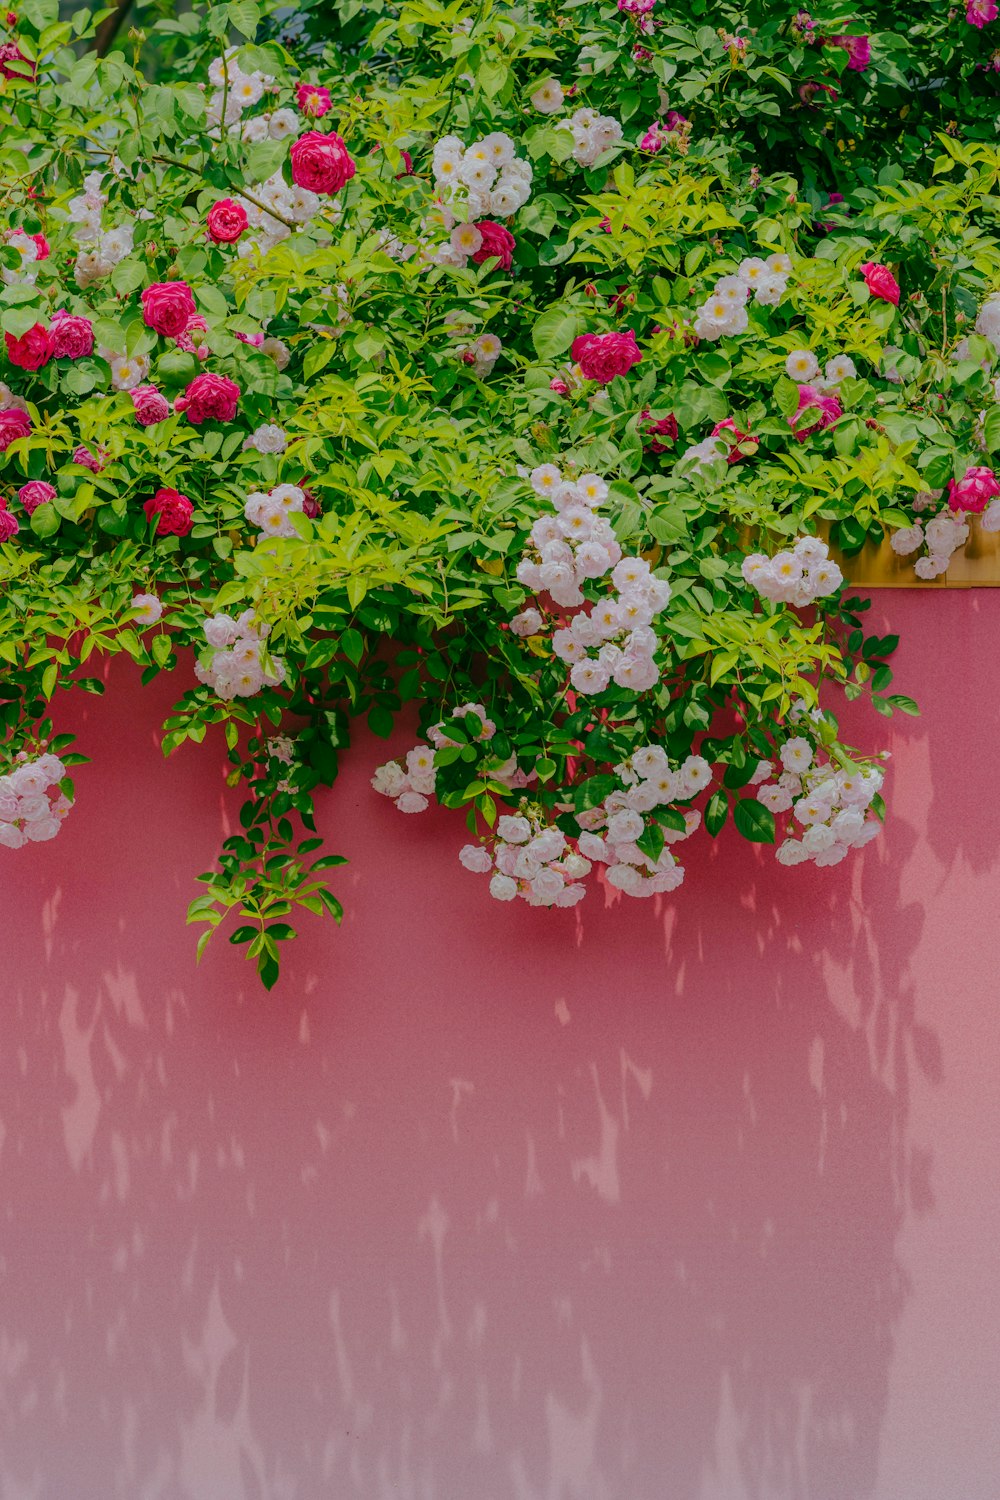 a planter filled with lots of pink and white flowers